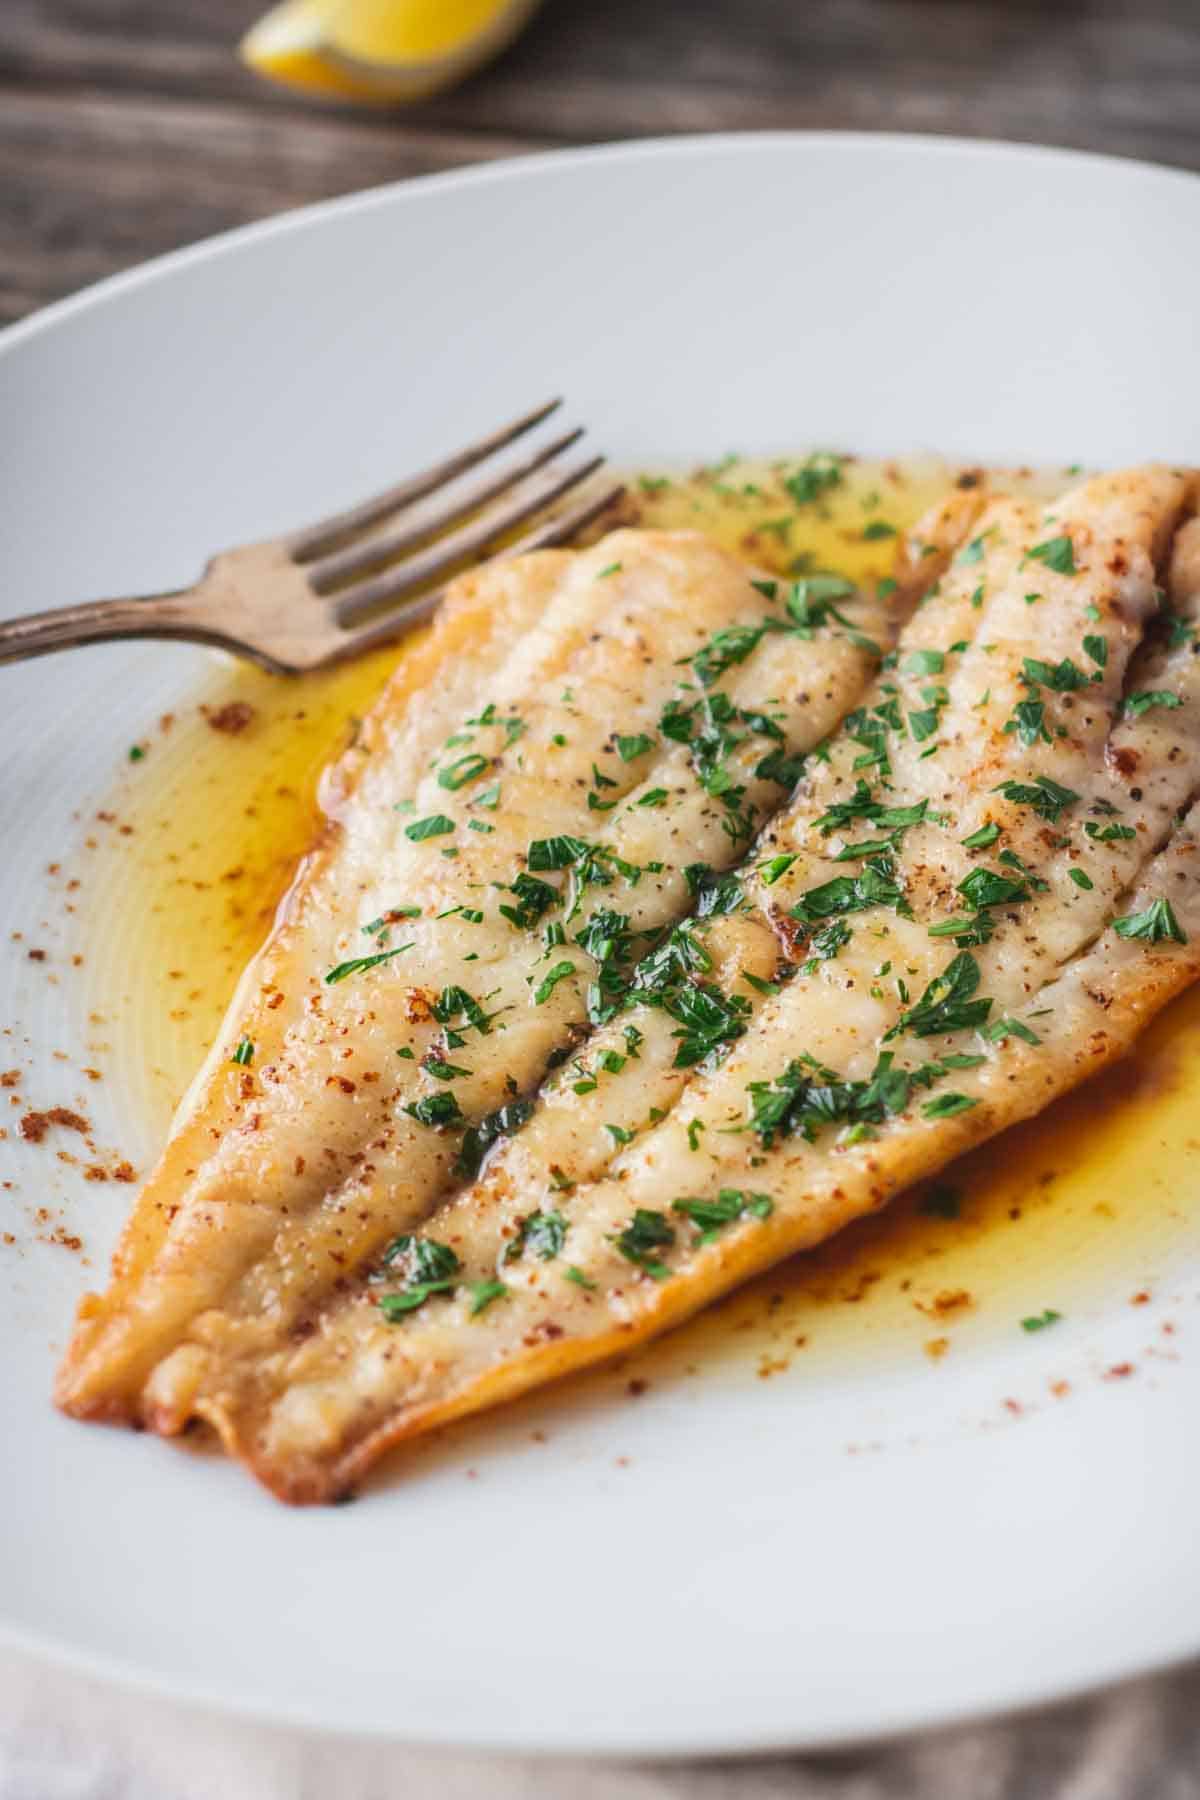 A fillet of flounder on a white plate with browned butter, parsley and a fork.